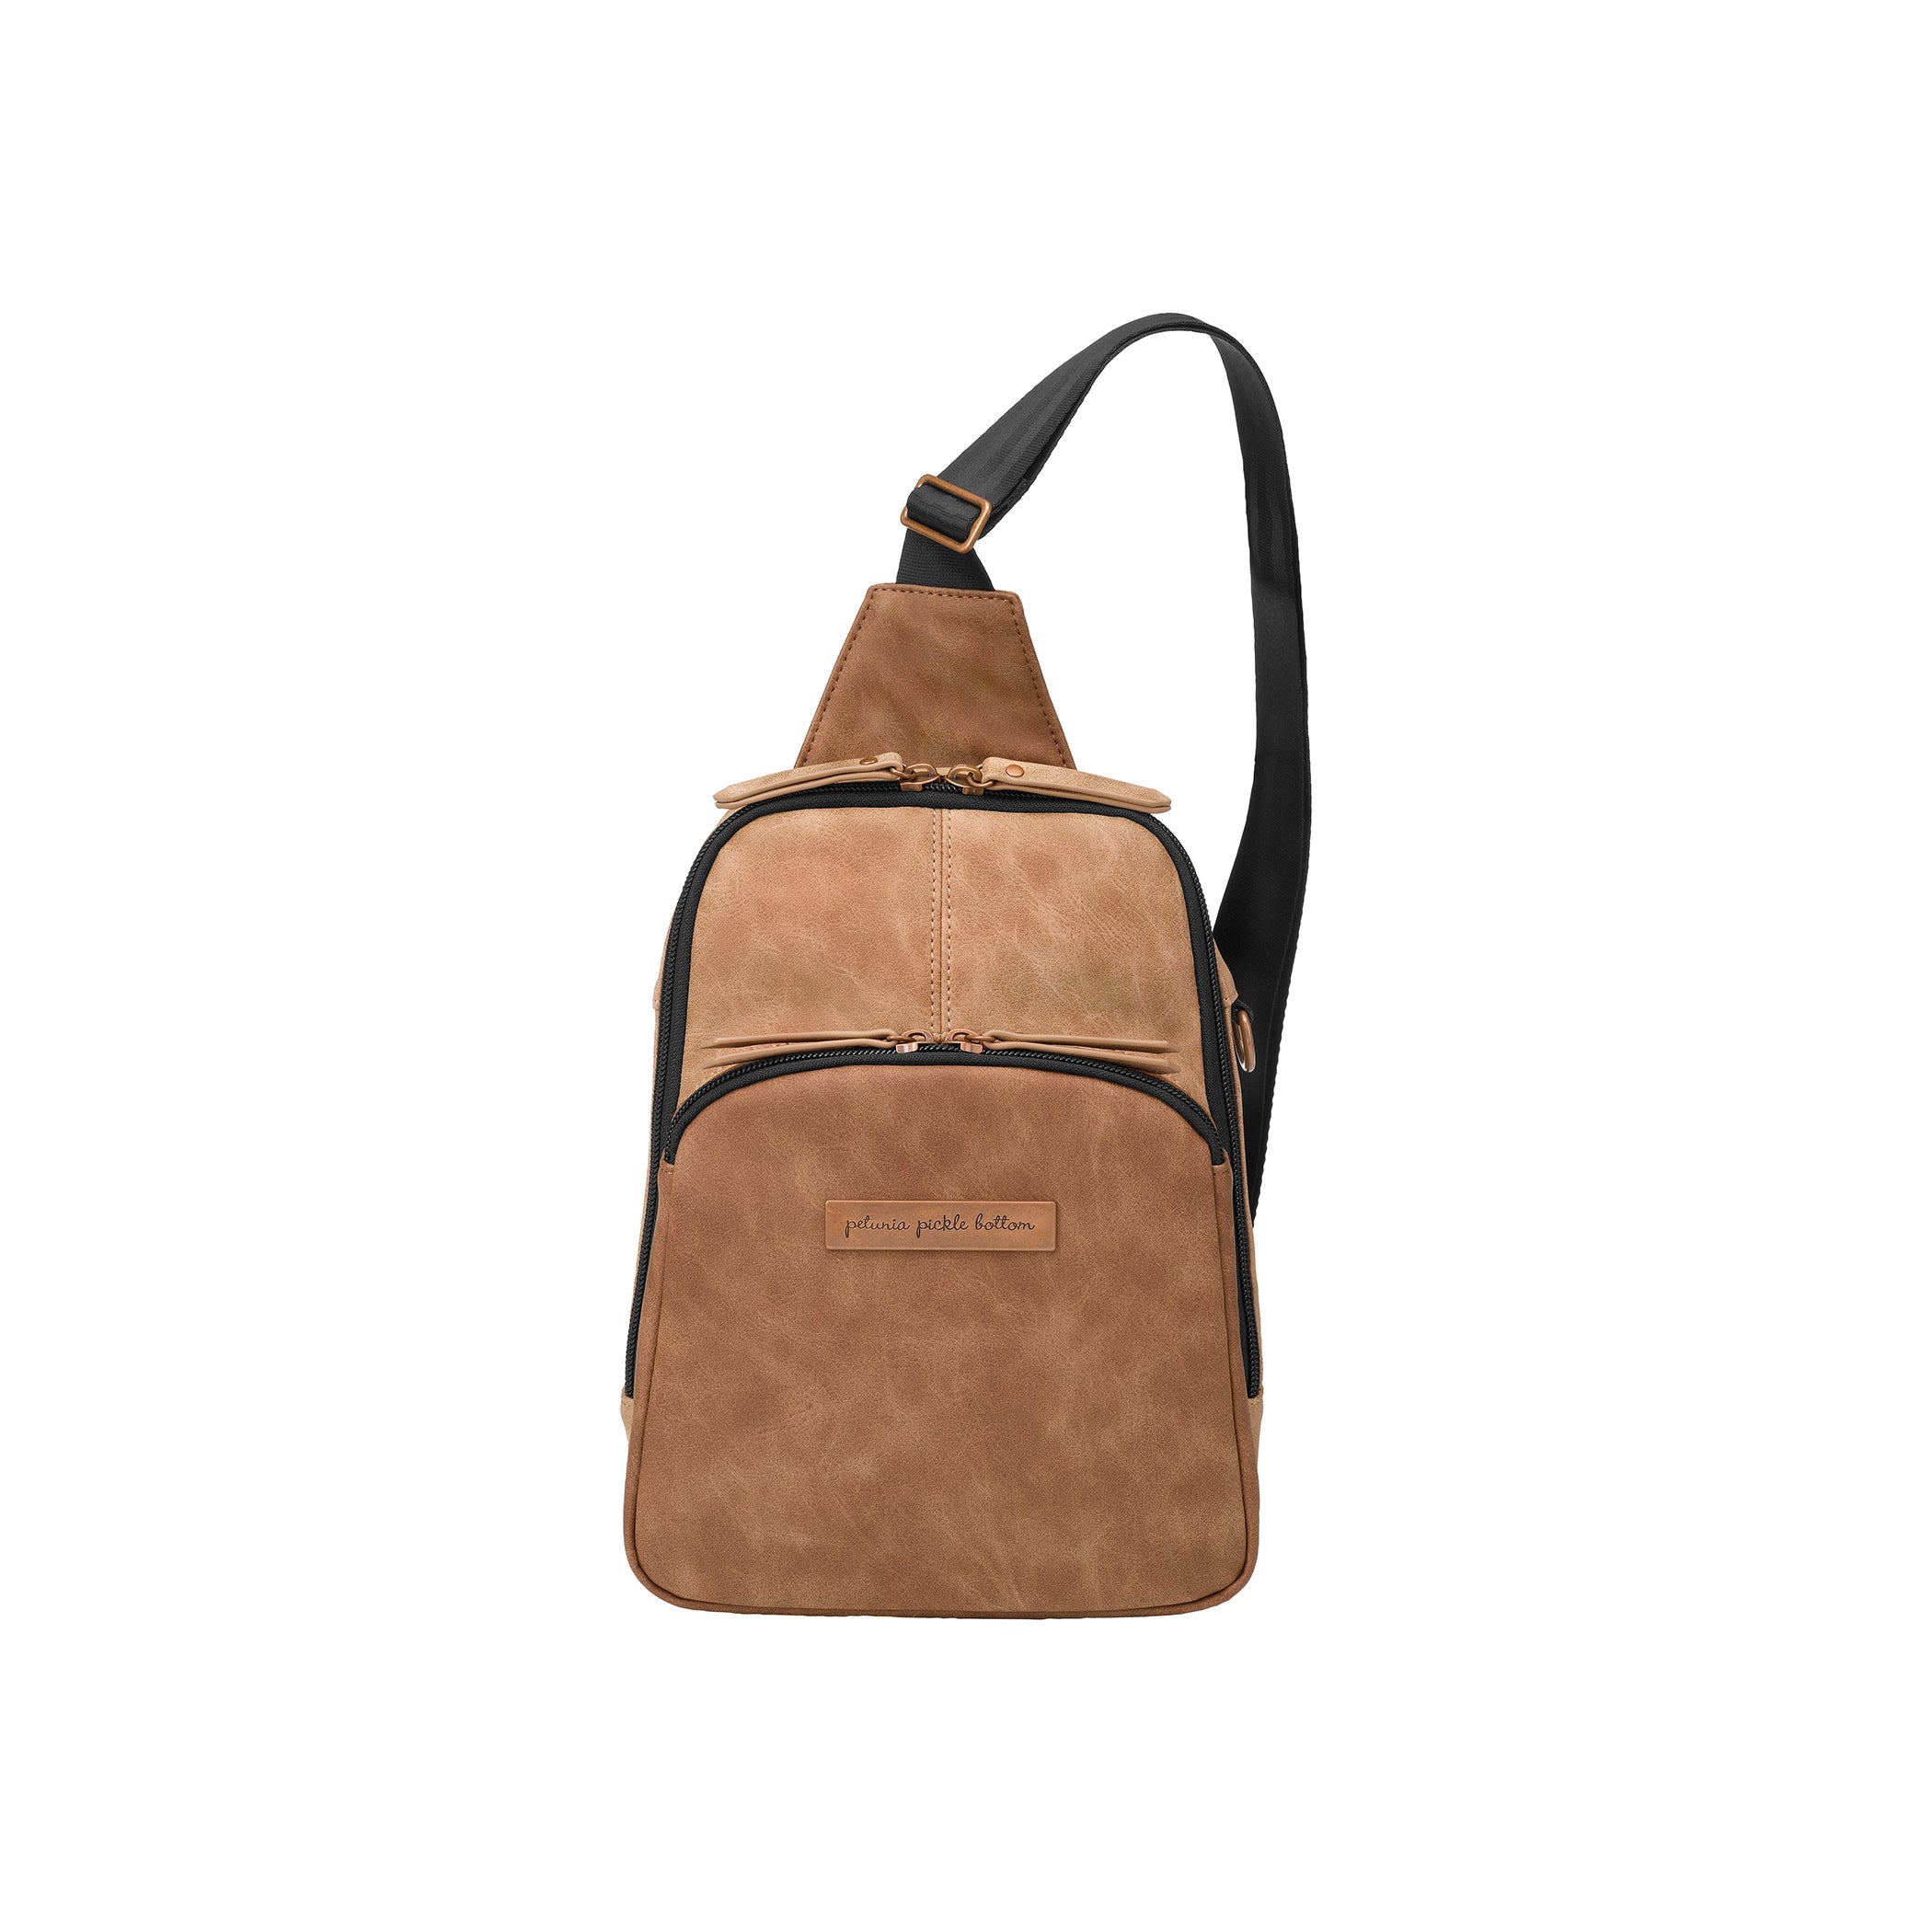 Rachel small backpack - Forest green leaf leather